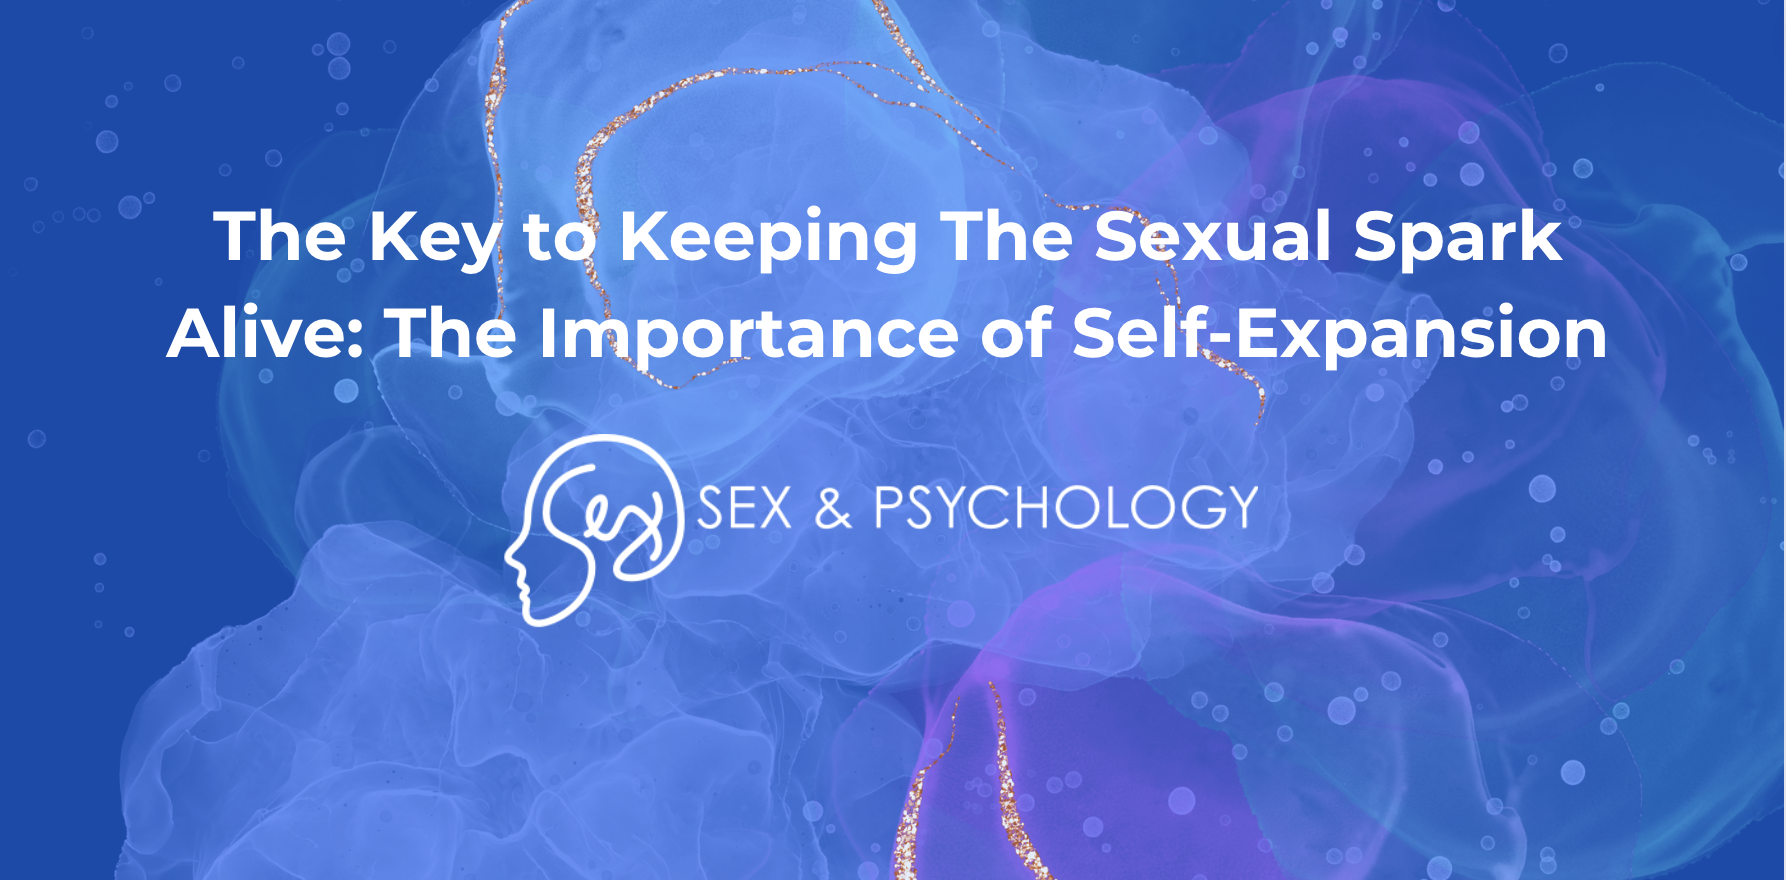 The Key to Keeping The Sexual Spark Alive: The Importance of Self-Expansion